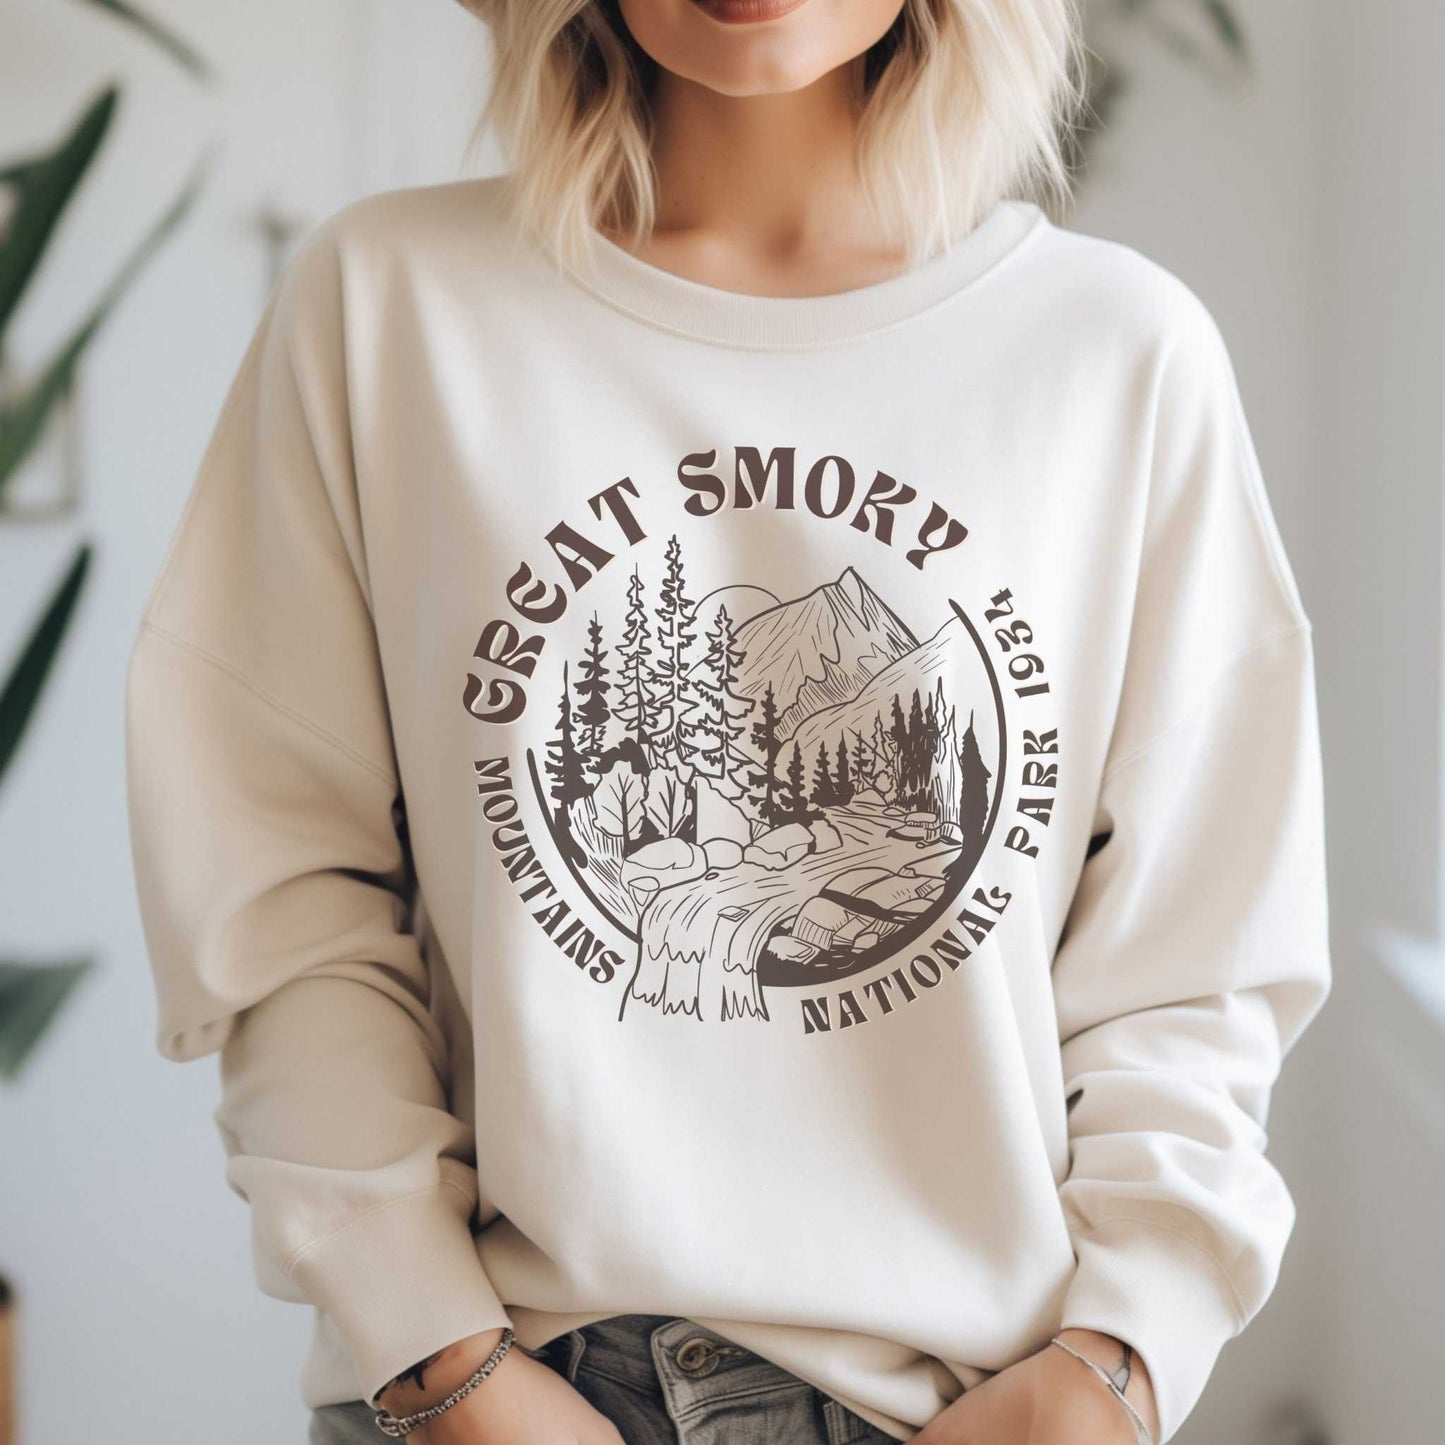 Great Smoky Mountains National Park SweatshirtBring the wilderness of Great Smoky National Park into your wardrobe with this vintage styled boyfriend sweatshirt inspired by the natural beauty of the park.
Detail